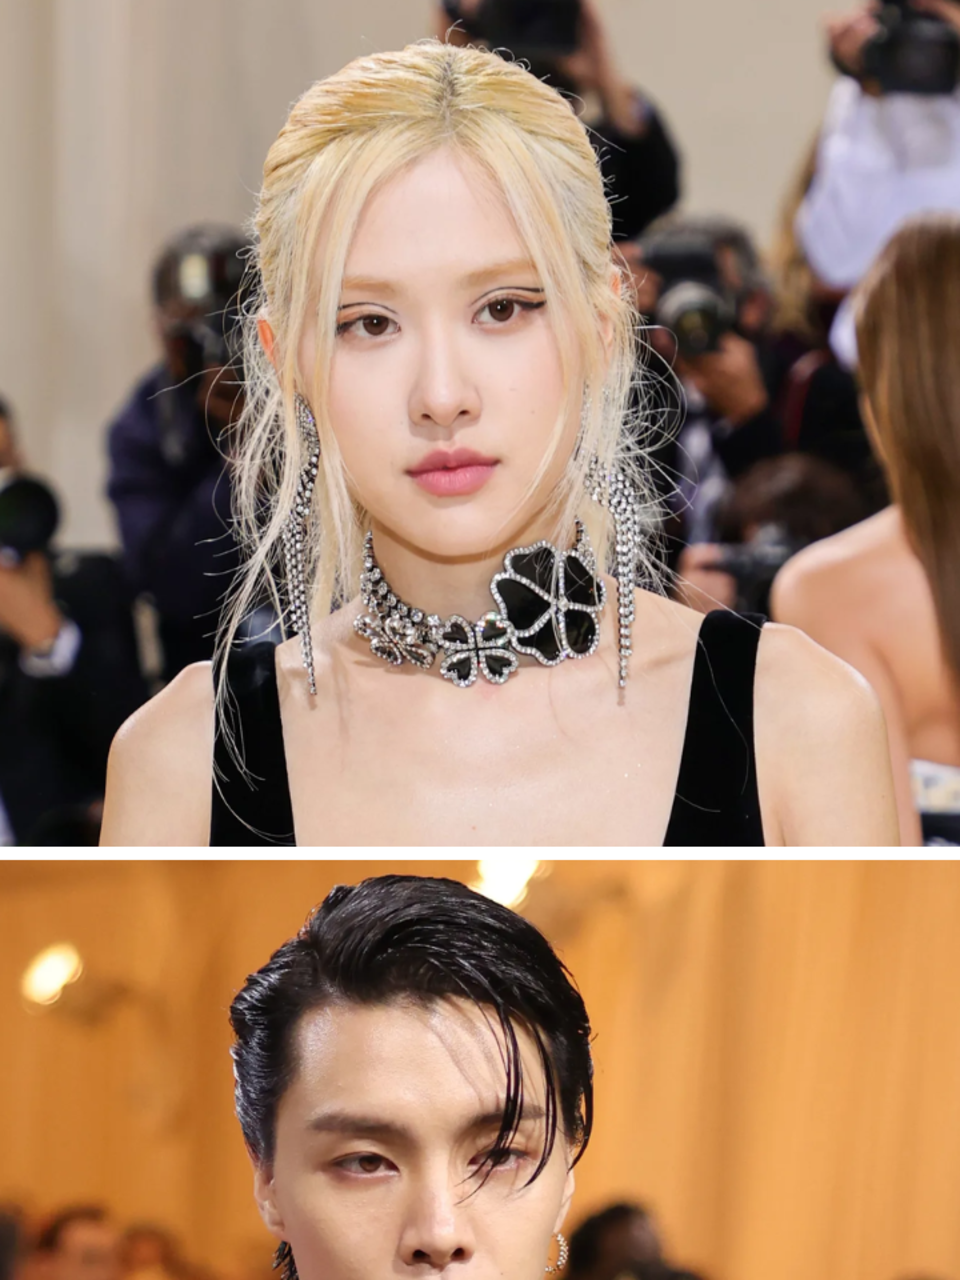 ​7 K-pop Idols Who Attended The Met Gala: Blackpink's Rosé, NCT's Johnny  And More